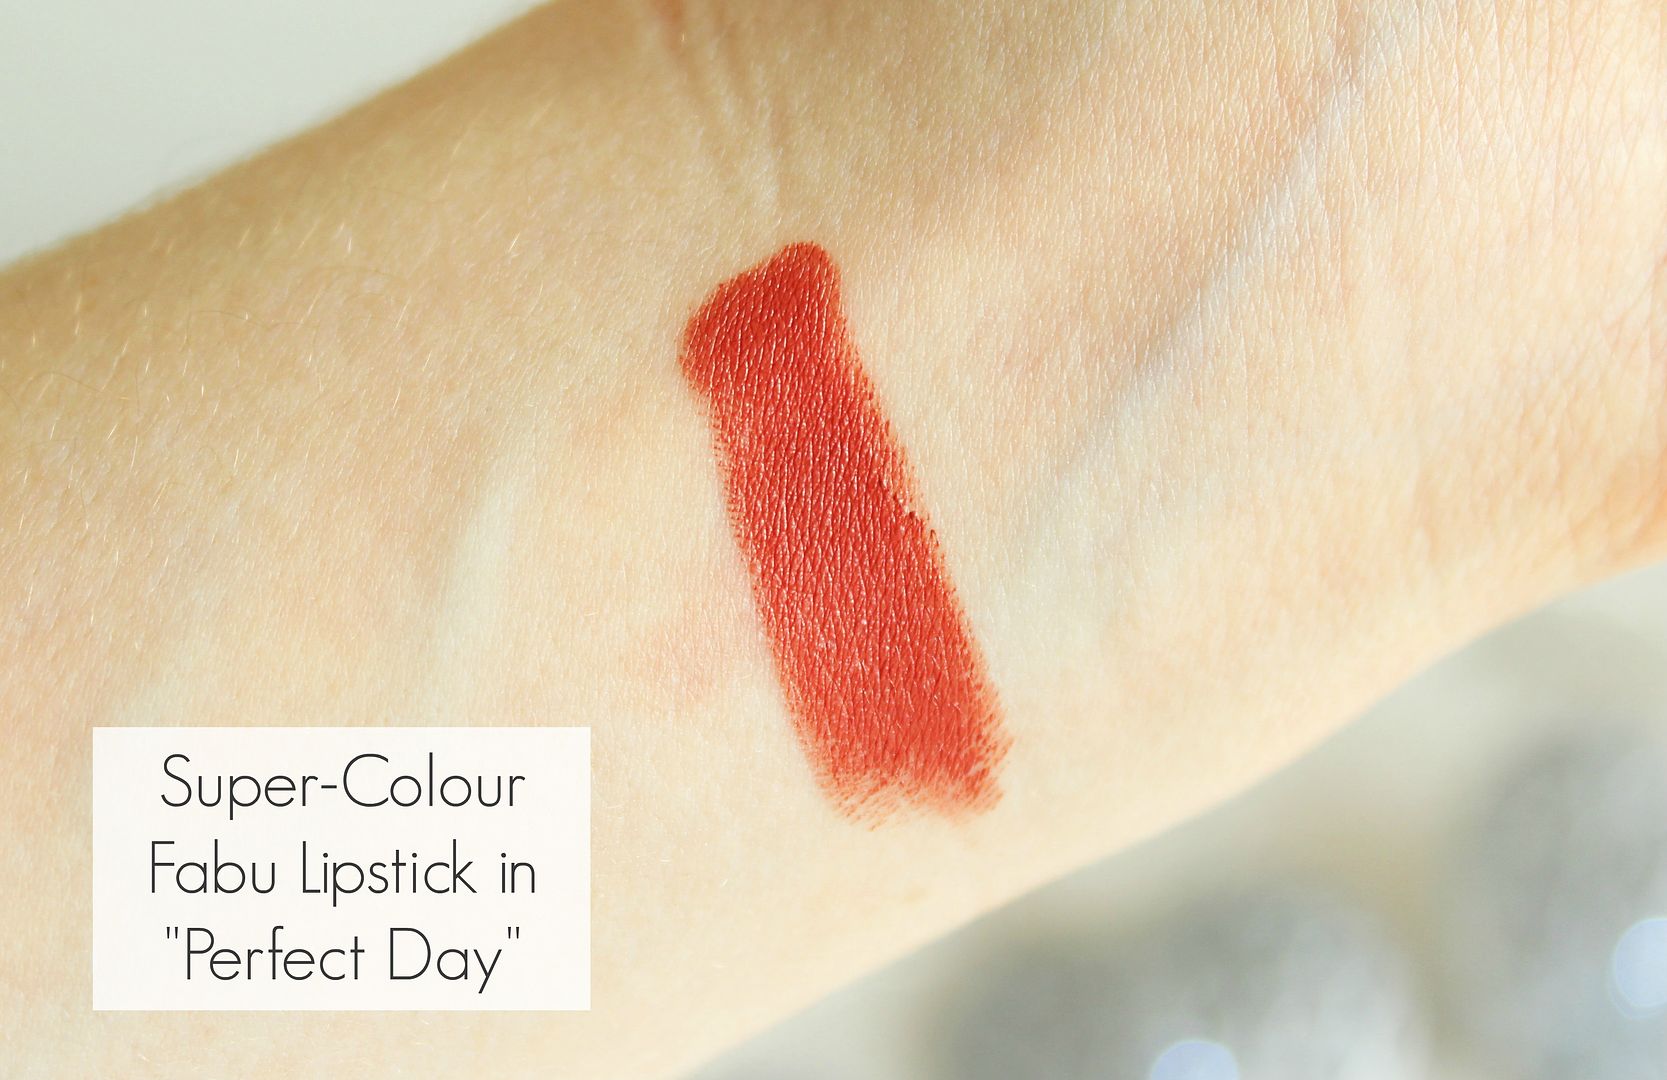 Every-Day-Red-Lip-Soap-And-Glory-Super-Colour-Fabu-Lipstick-Perfect-Day-Review-Swatch-On-Skin-Belle-Amie-UK-Beauty-Fashion-Lifestyle-Blog